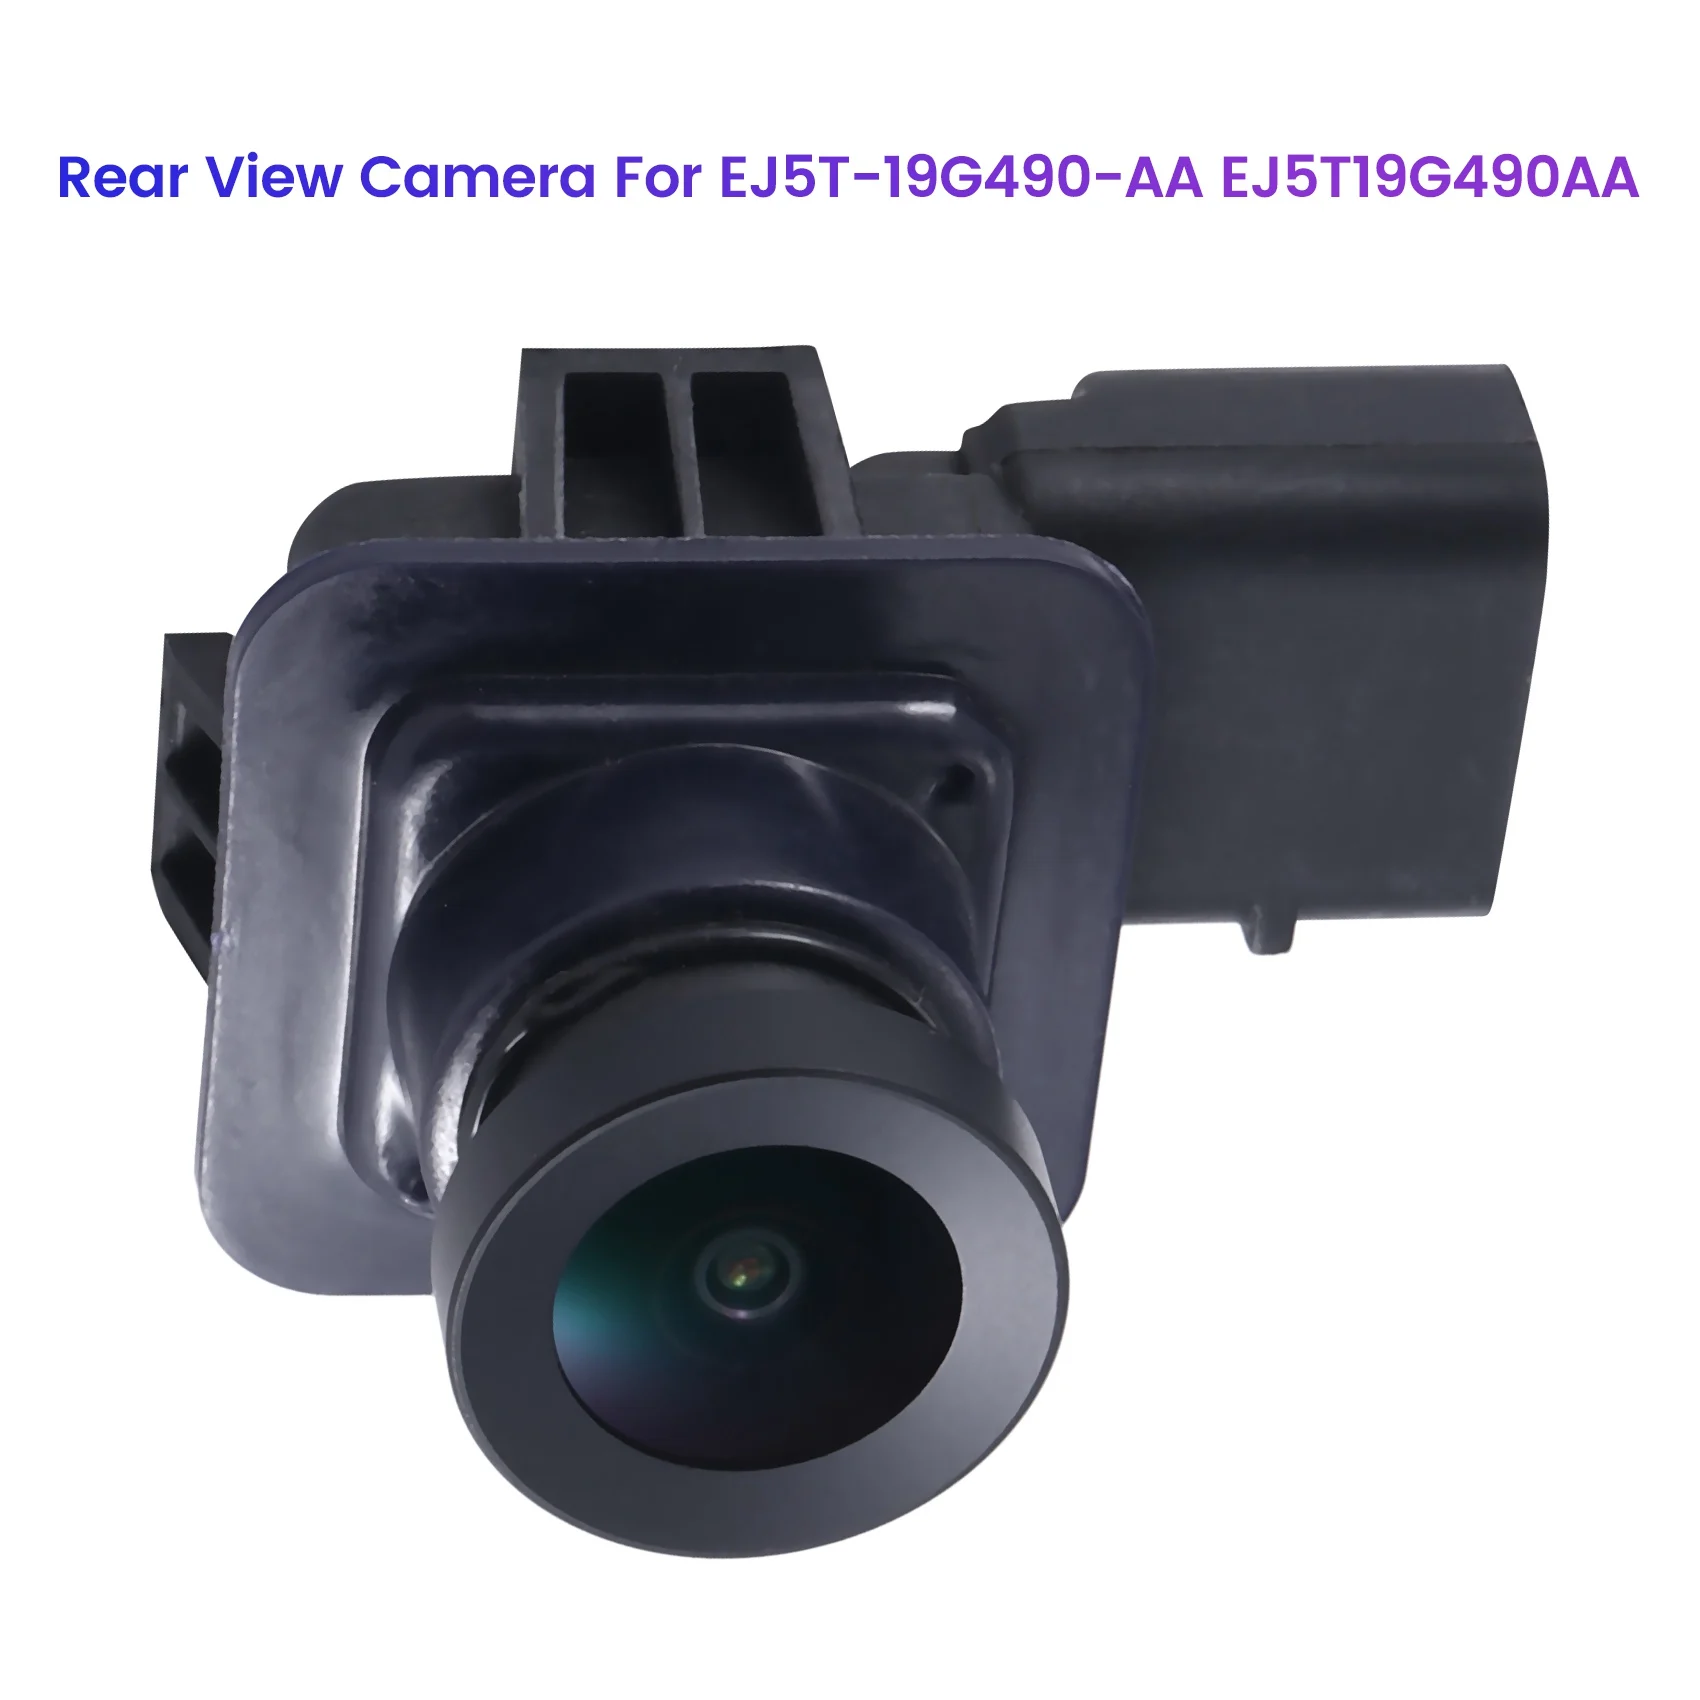 

Rear View Camera for Ford Reverse Camera Backup Parking Camera for Ford EJ5T-19G490-AA EJ5T19G490AA